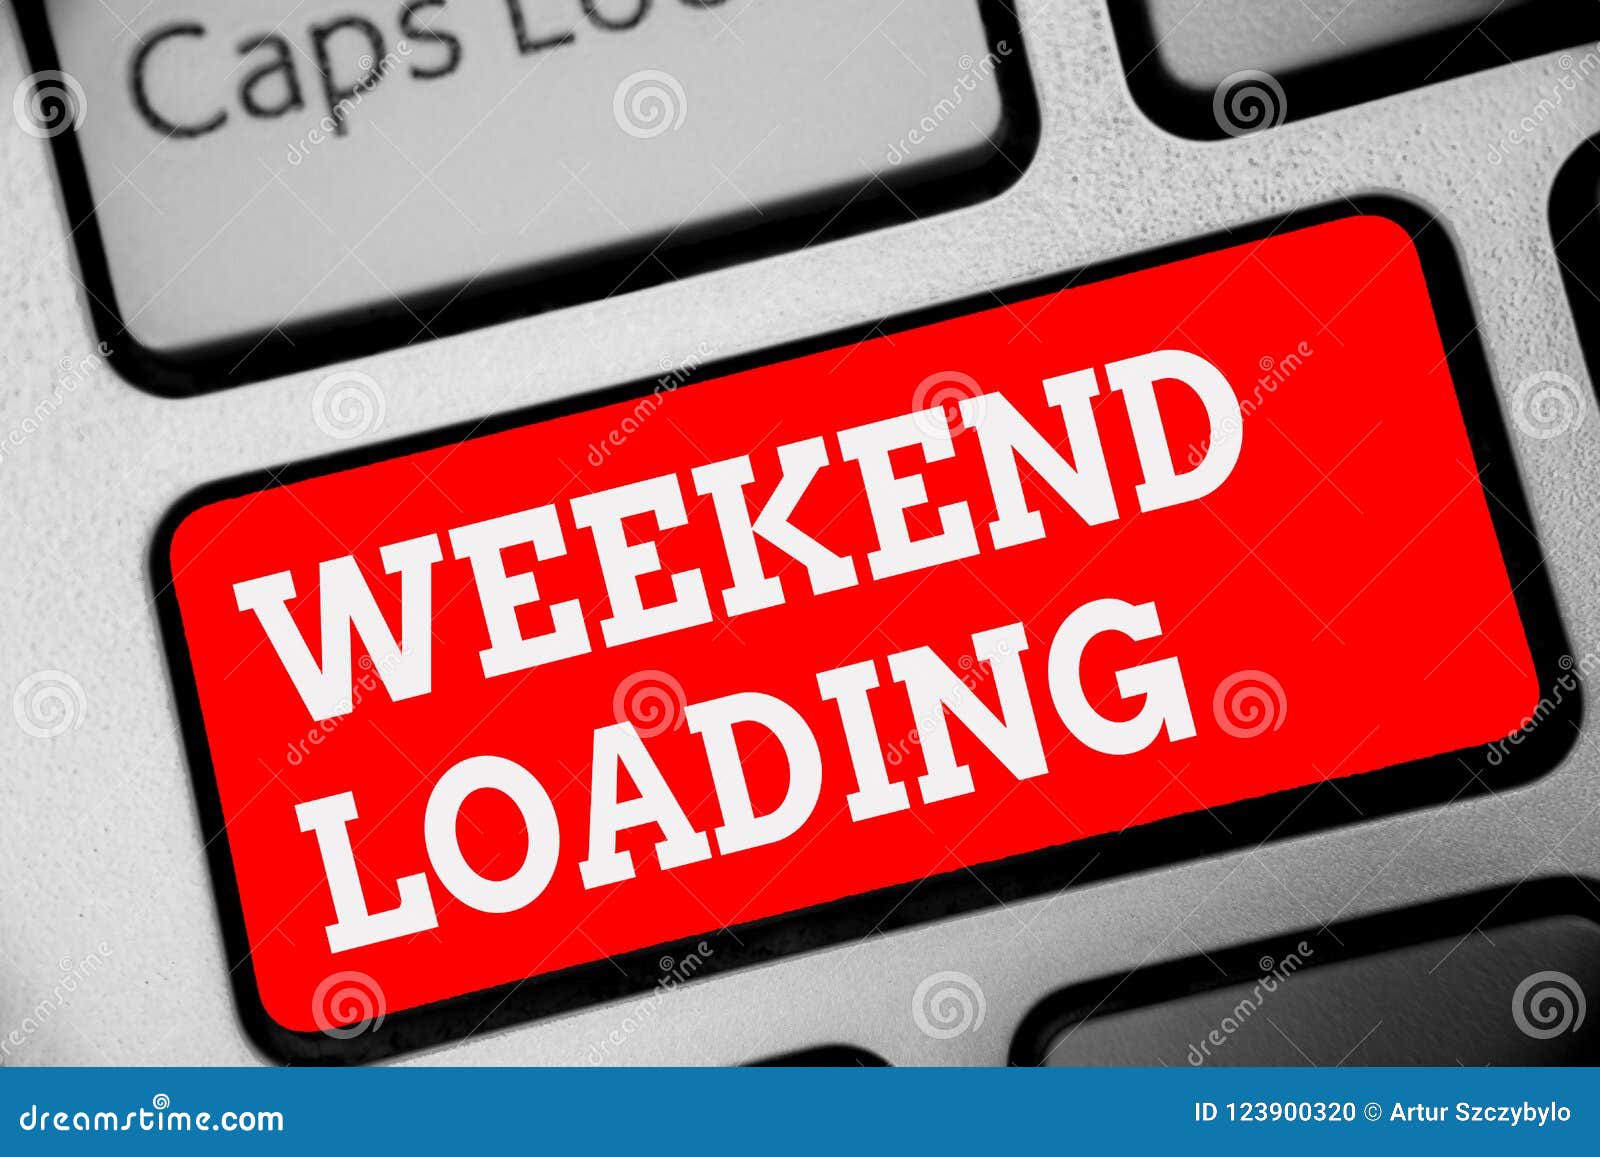 624 Weekend Loading Stock Photos - Free & Royalty-Free Stock ...